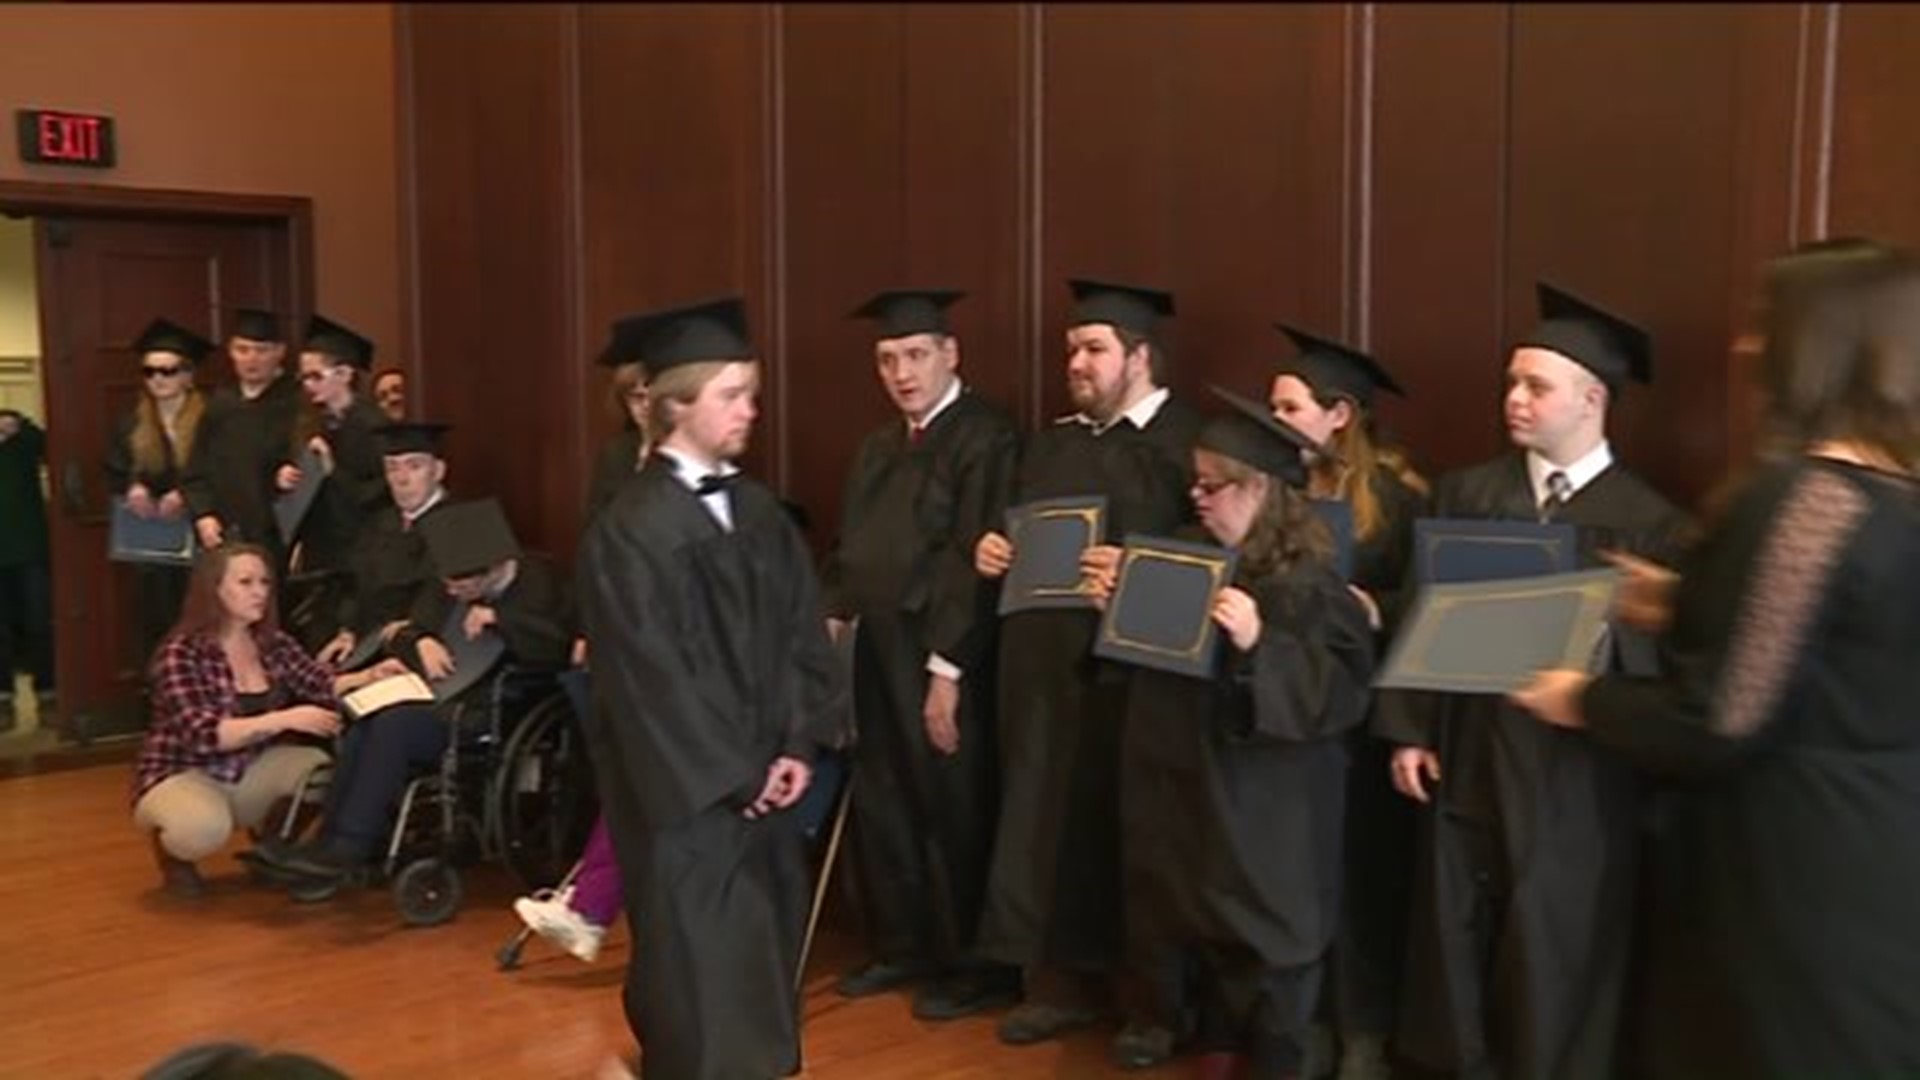 Graduation Day for Students at Arc of NEPA